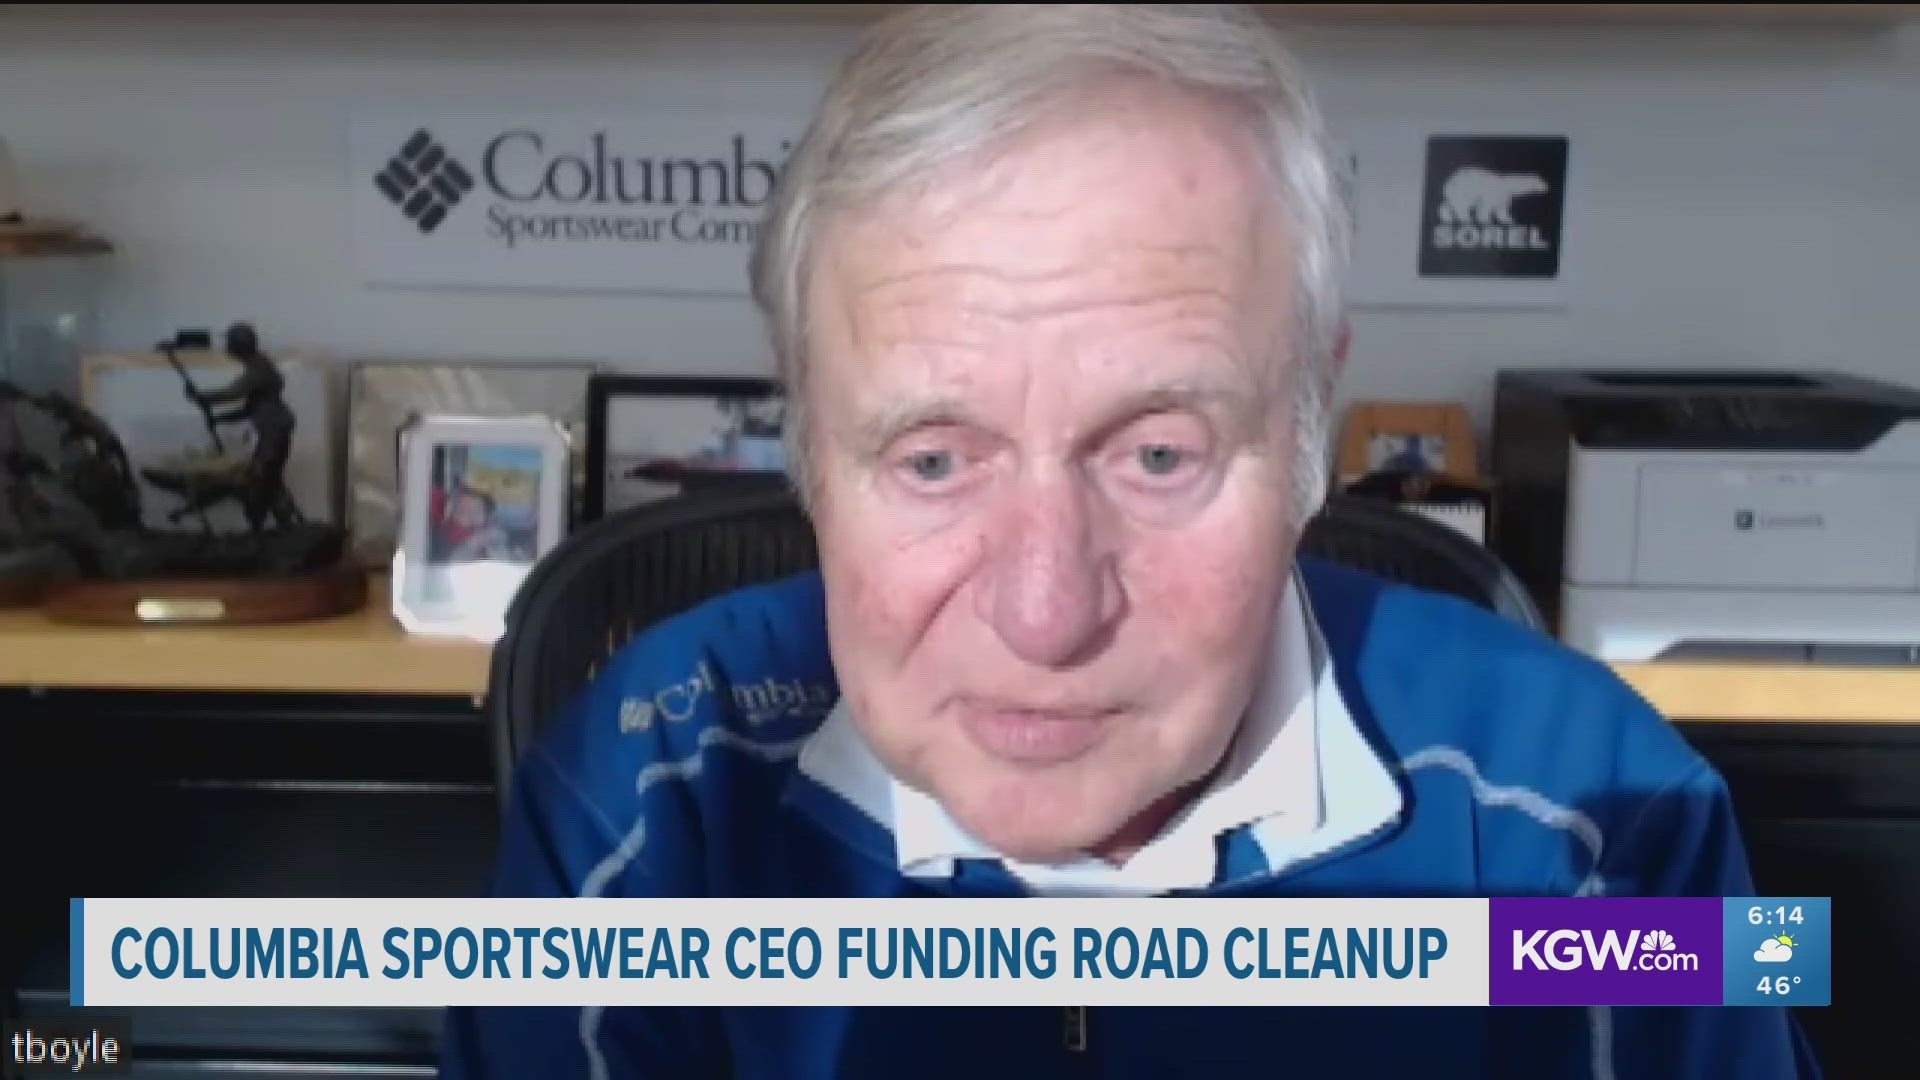 Tim Boyle is contributing thousands of dollars to cleanup areas of the city, funding that could help the Oregon Department of Transportation.